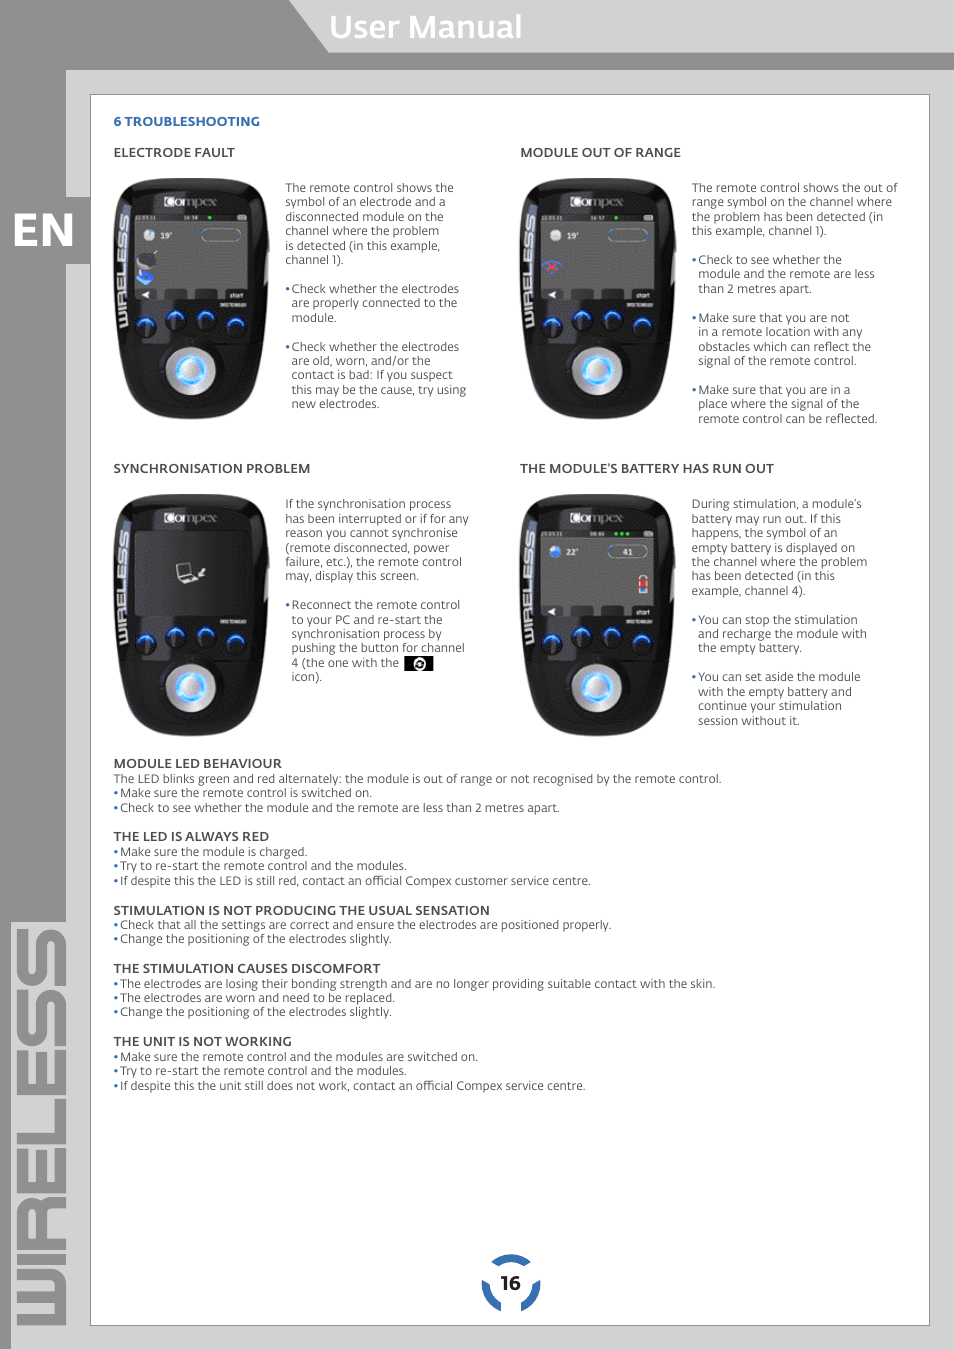 User manual | Compex Wireless User Manual | Page 17 / 147